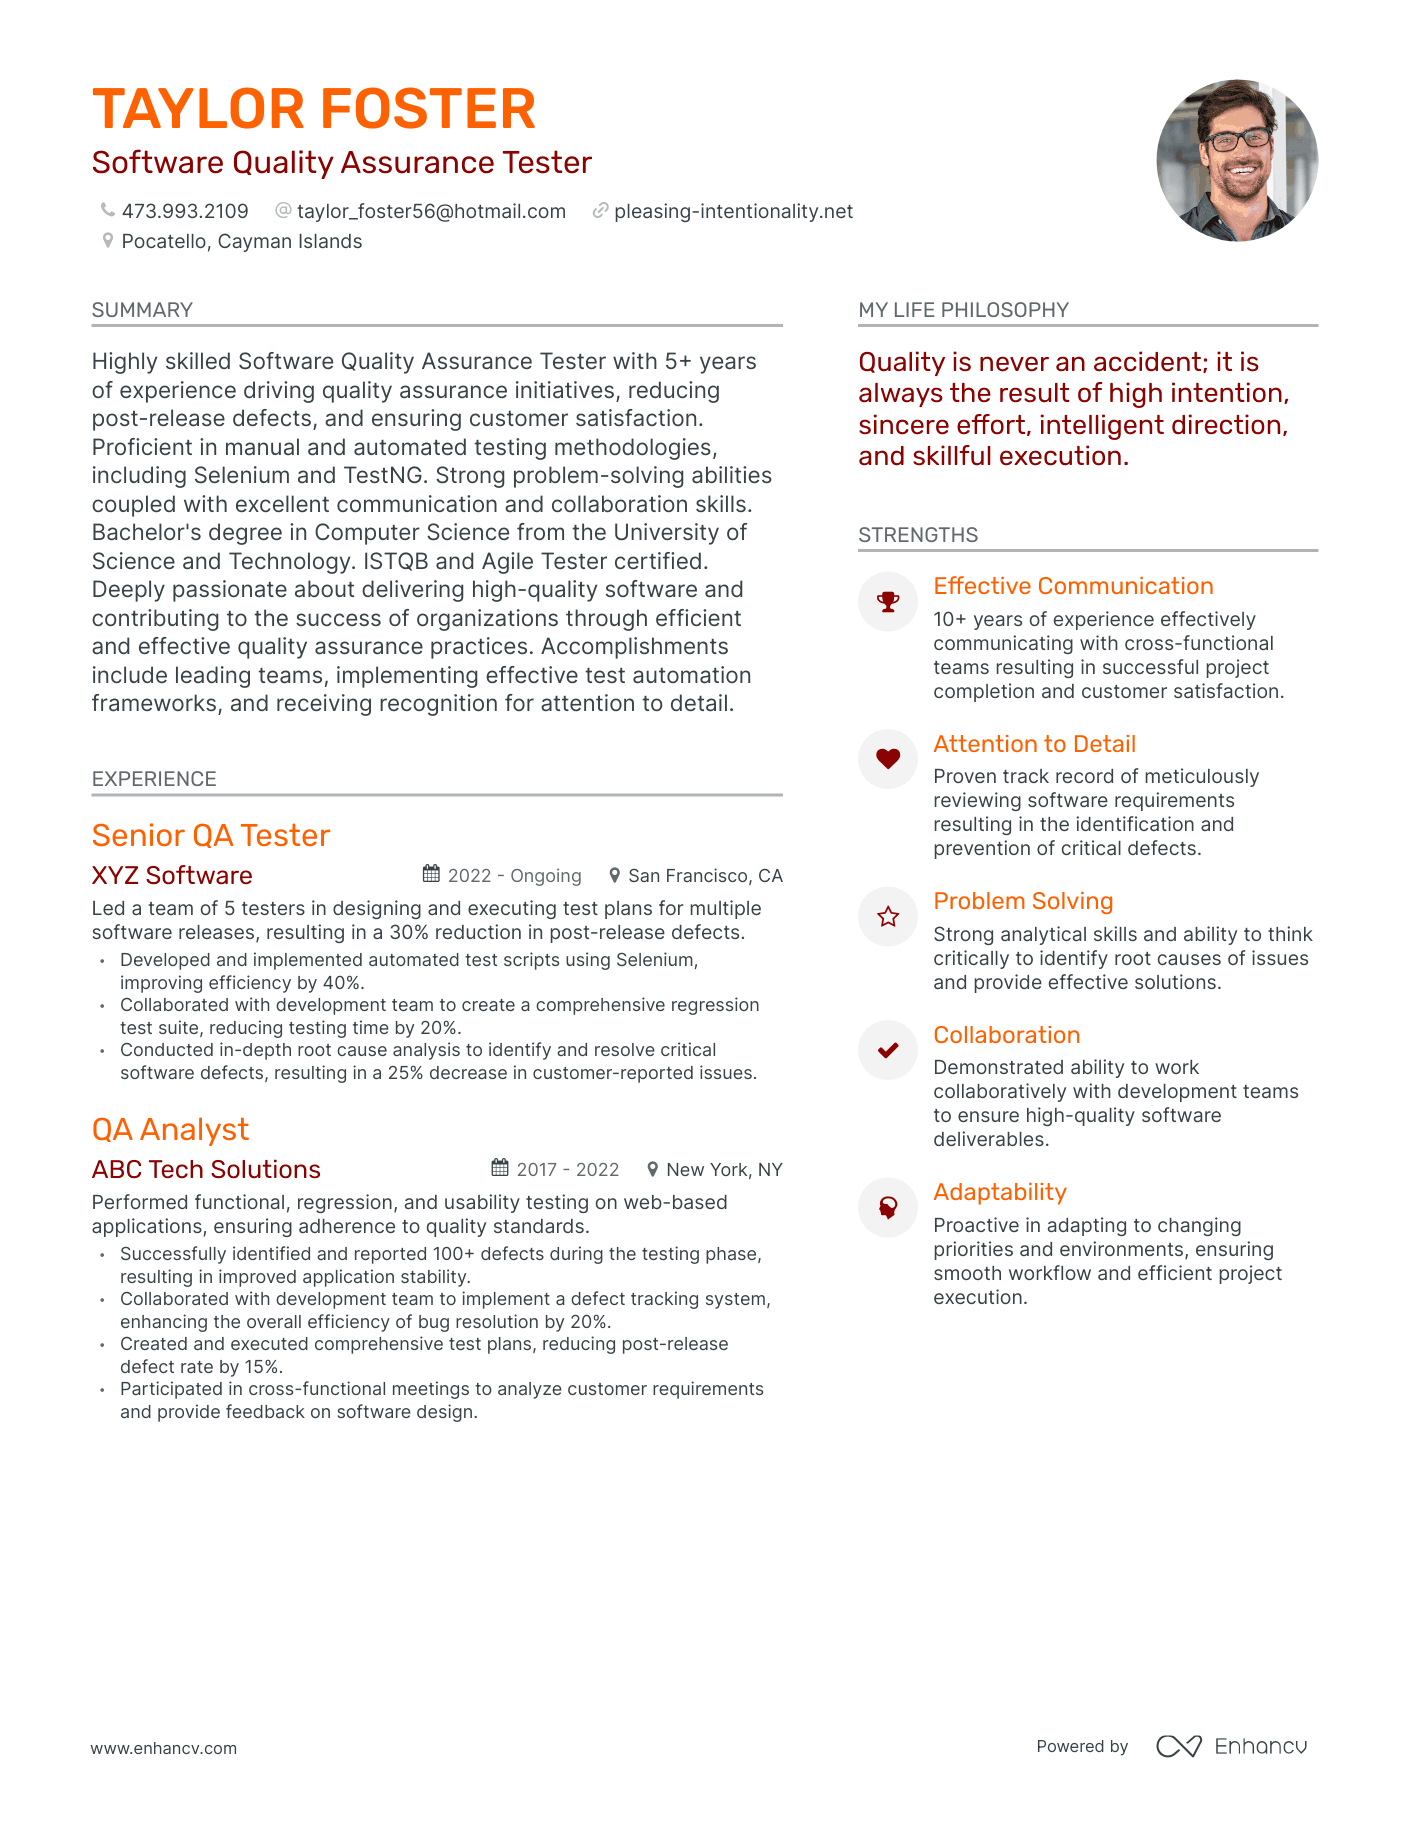 Software Quality Assurance Tester resume example